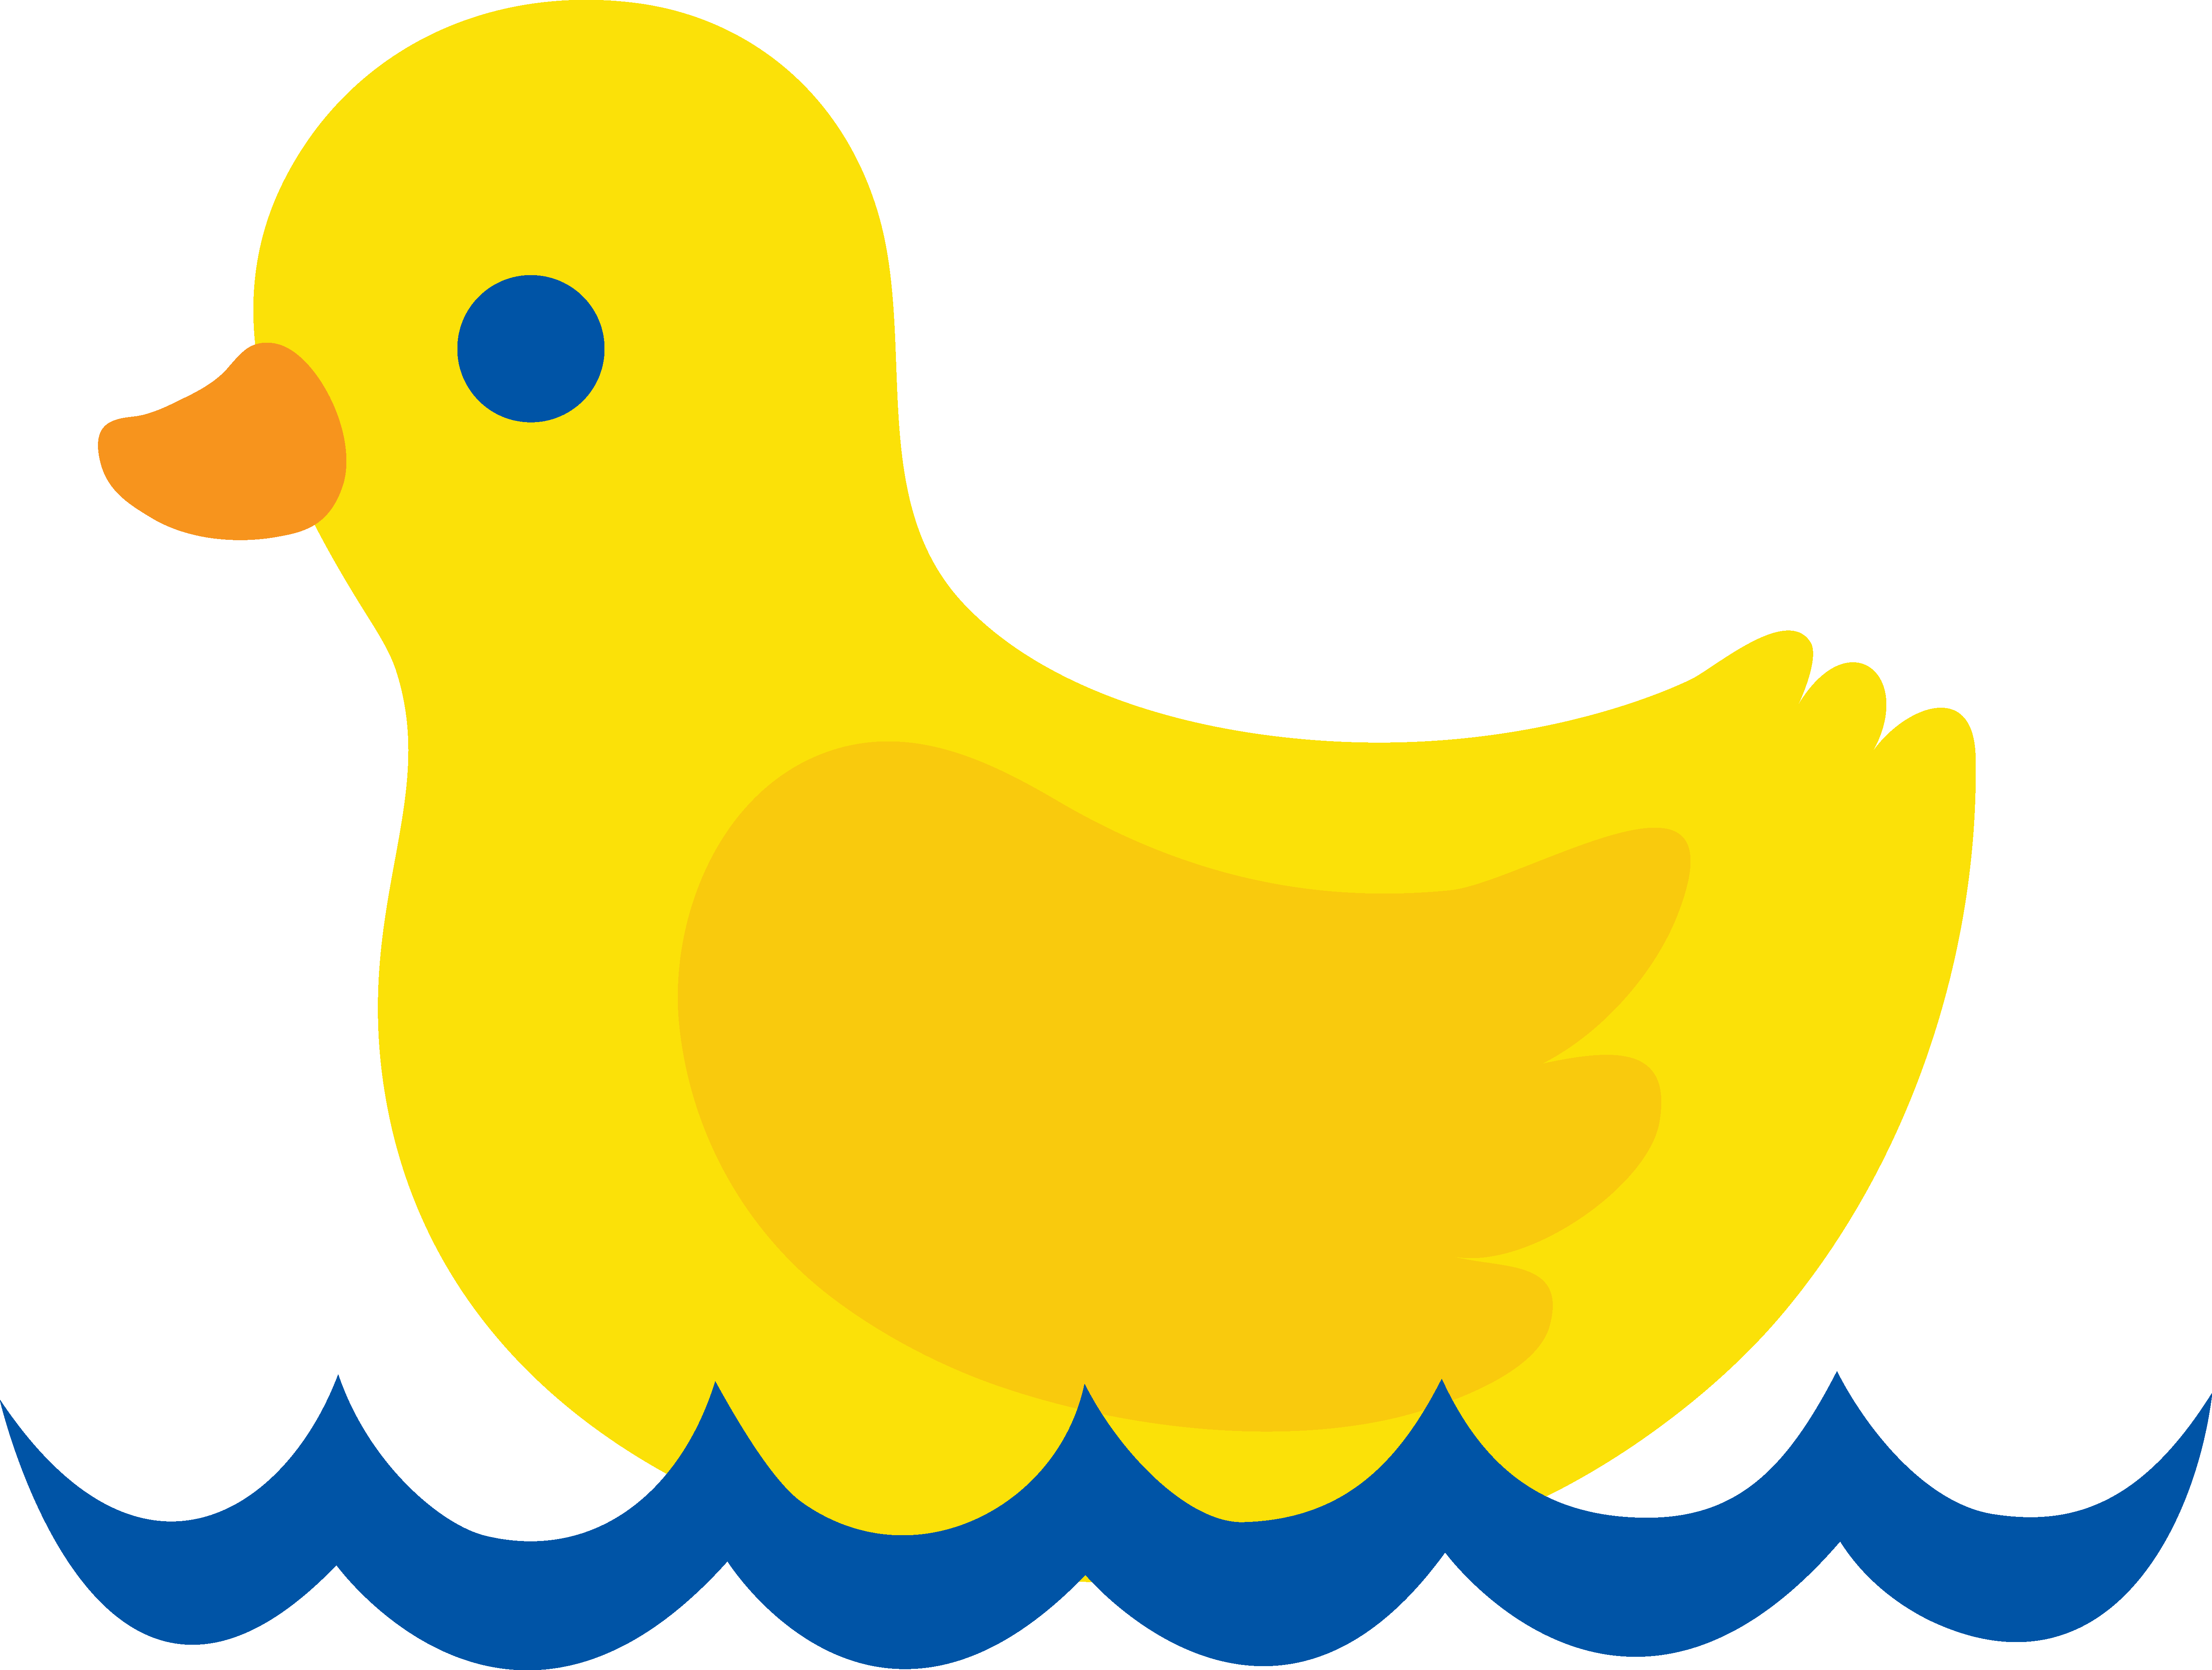 Duck Clipart Image | Clipart Panda - Free Clipart Images